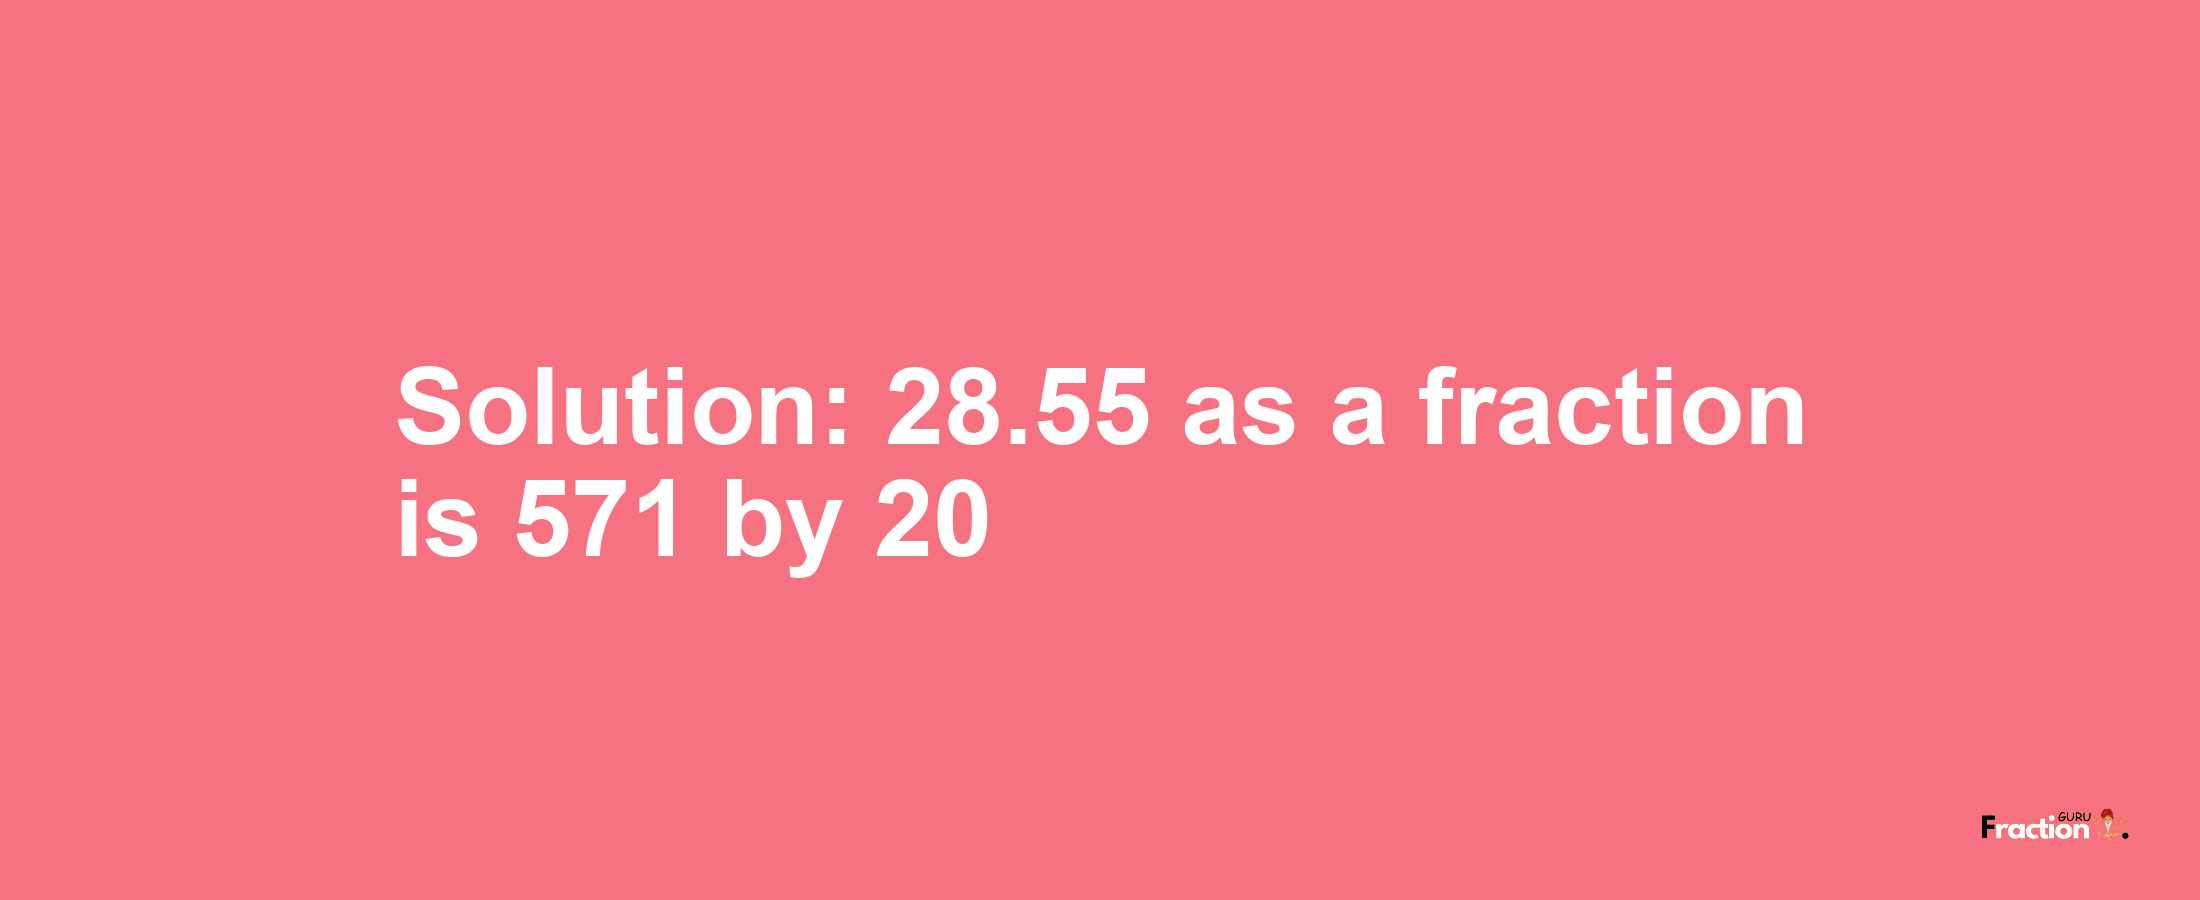 Solution:28.55 as a fraction is 571/20